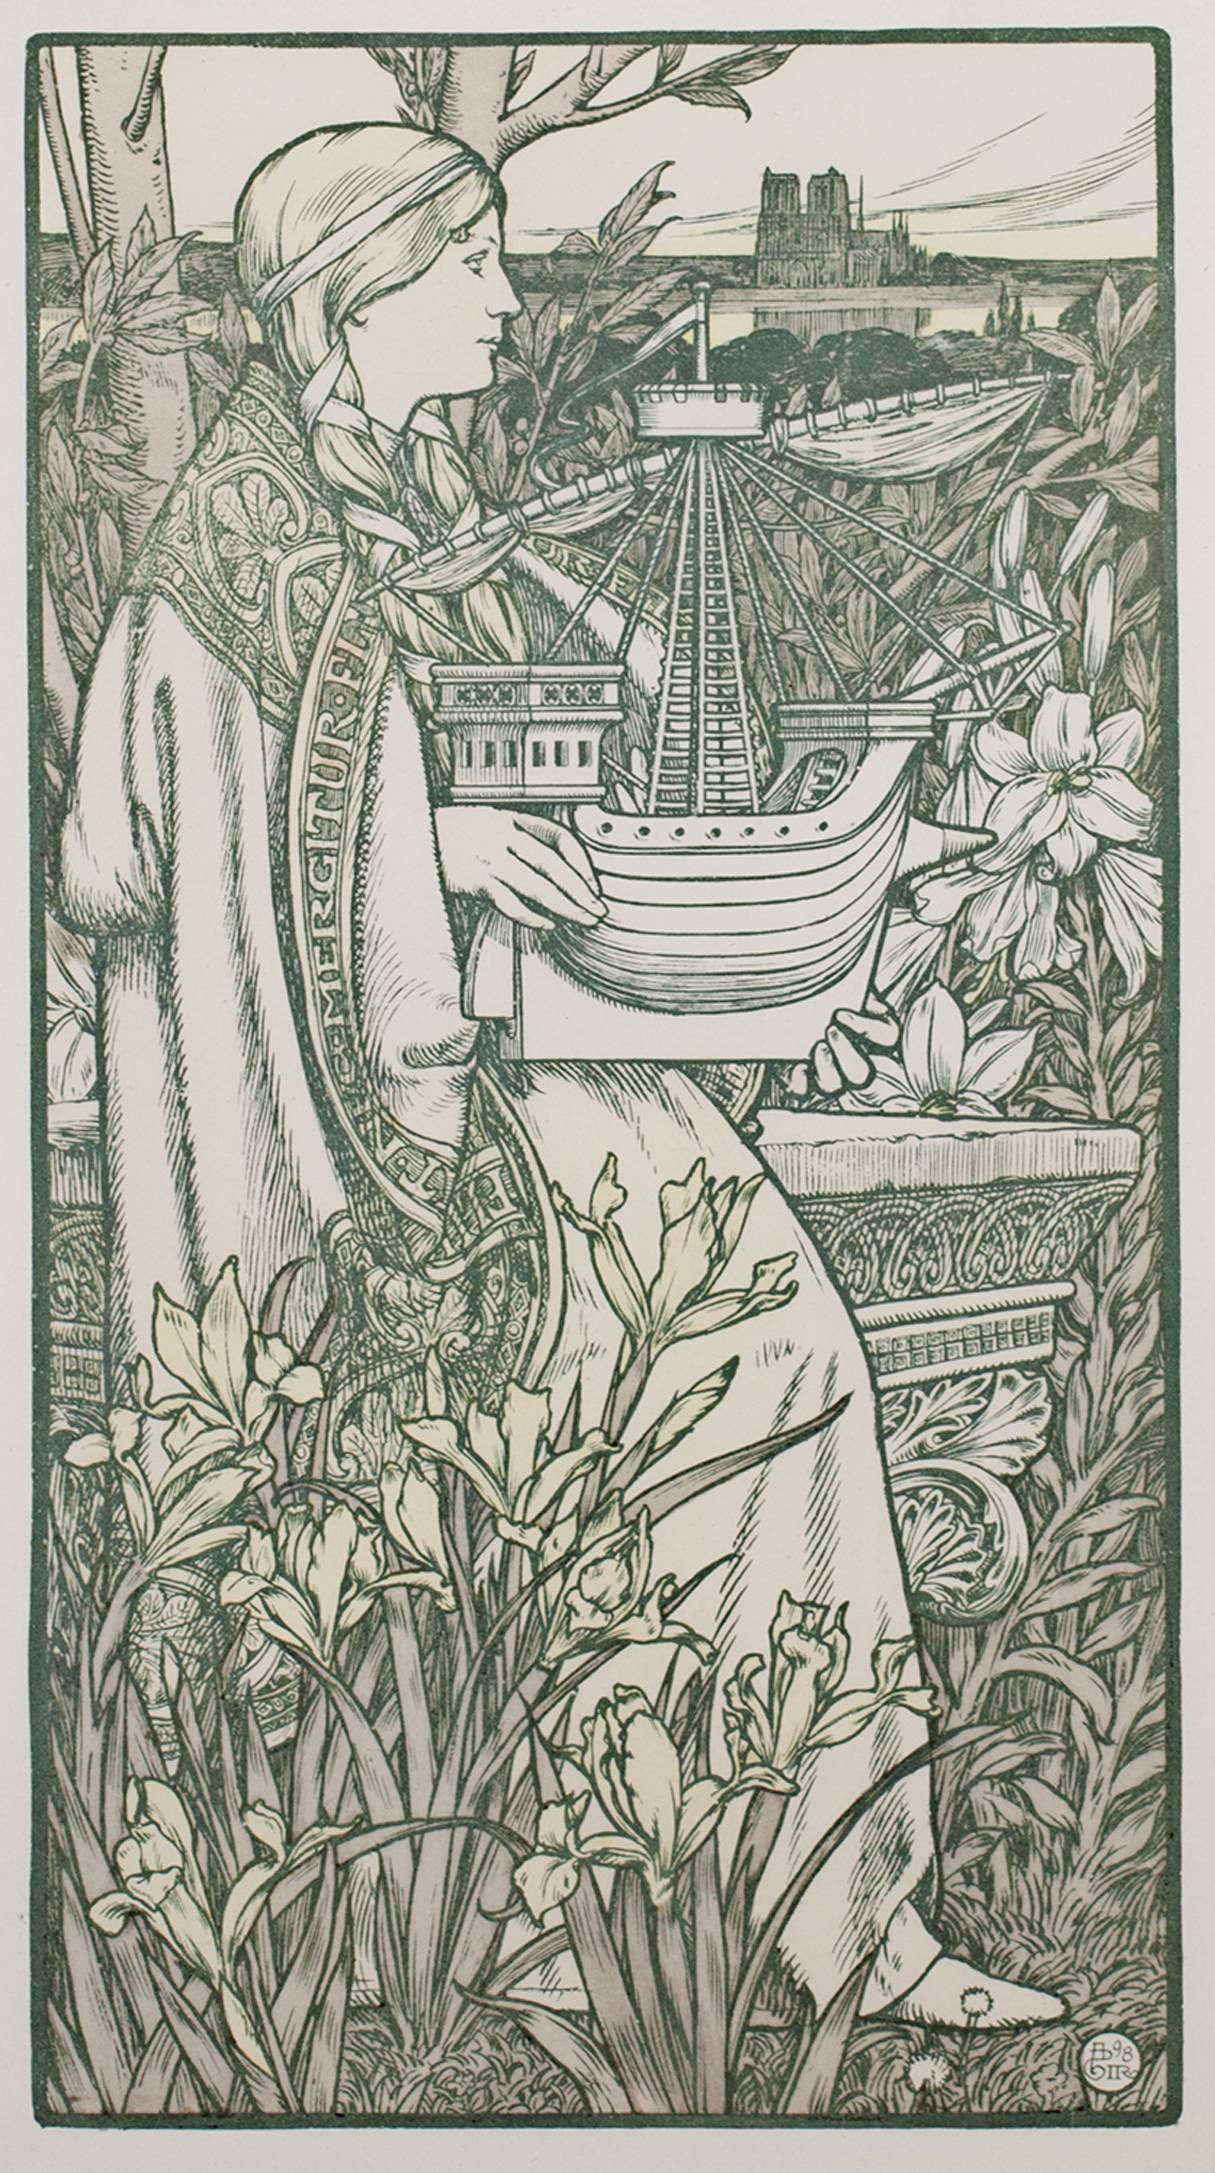 "Lutece" is an original color lithograph by Adolphe Giraldon. This piece depicts a woman holding a sailing ship among lush vegetation. In the background, Notre Dame rises. Lutece is the French name for the ancient Roman city that stood where Paris